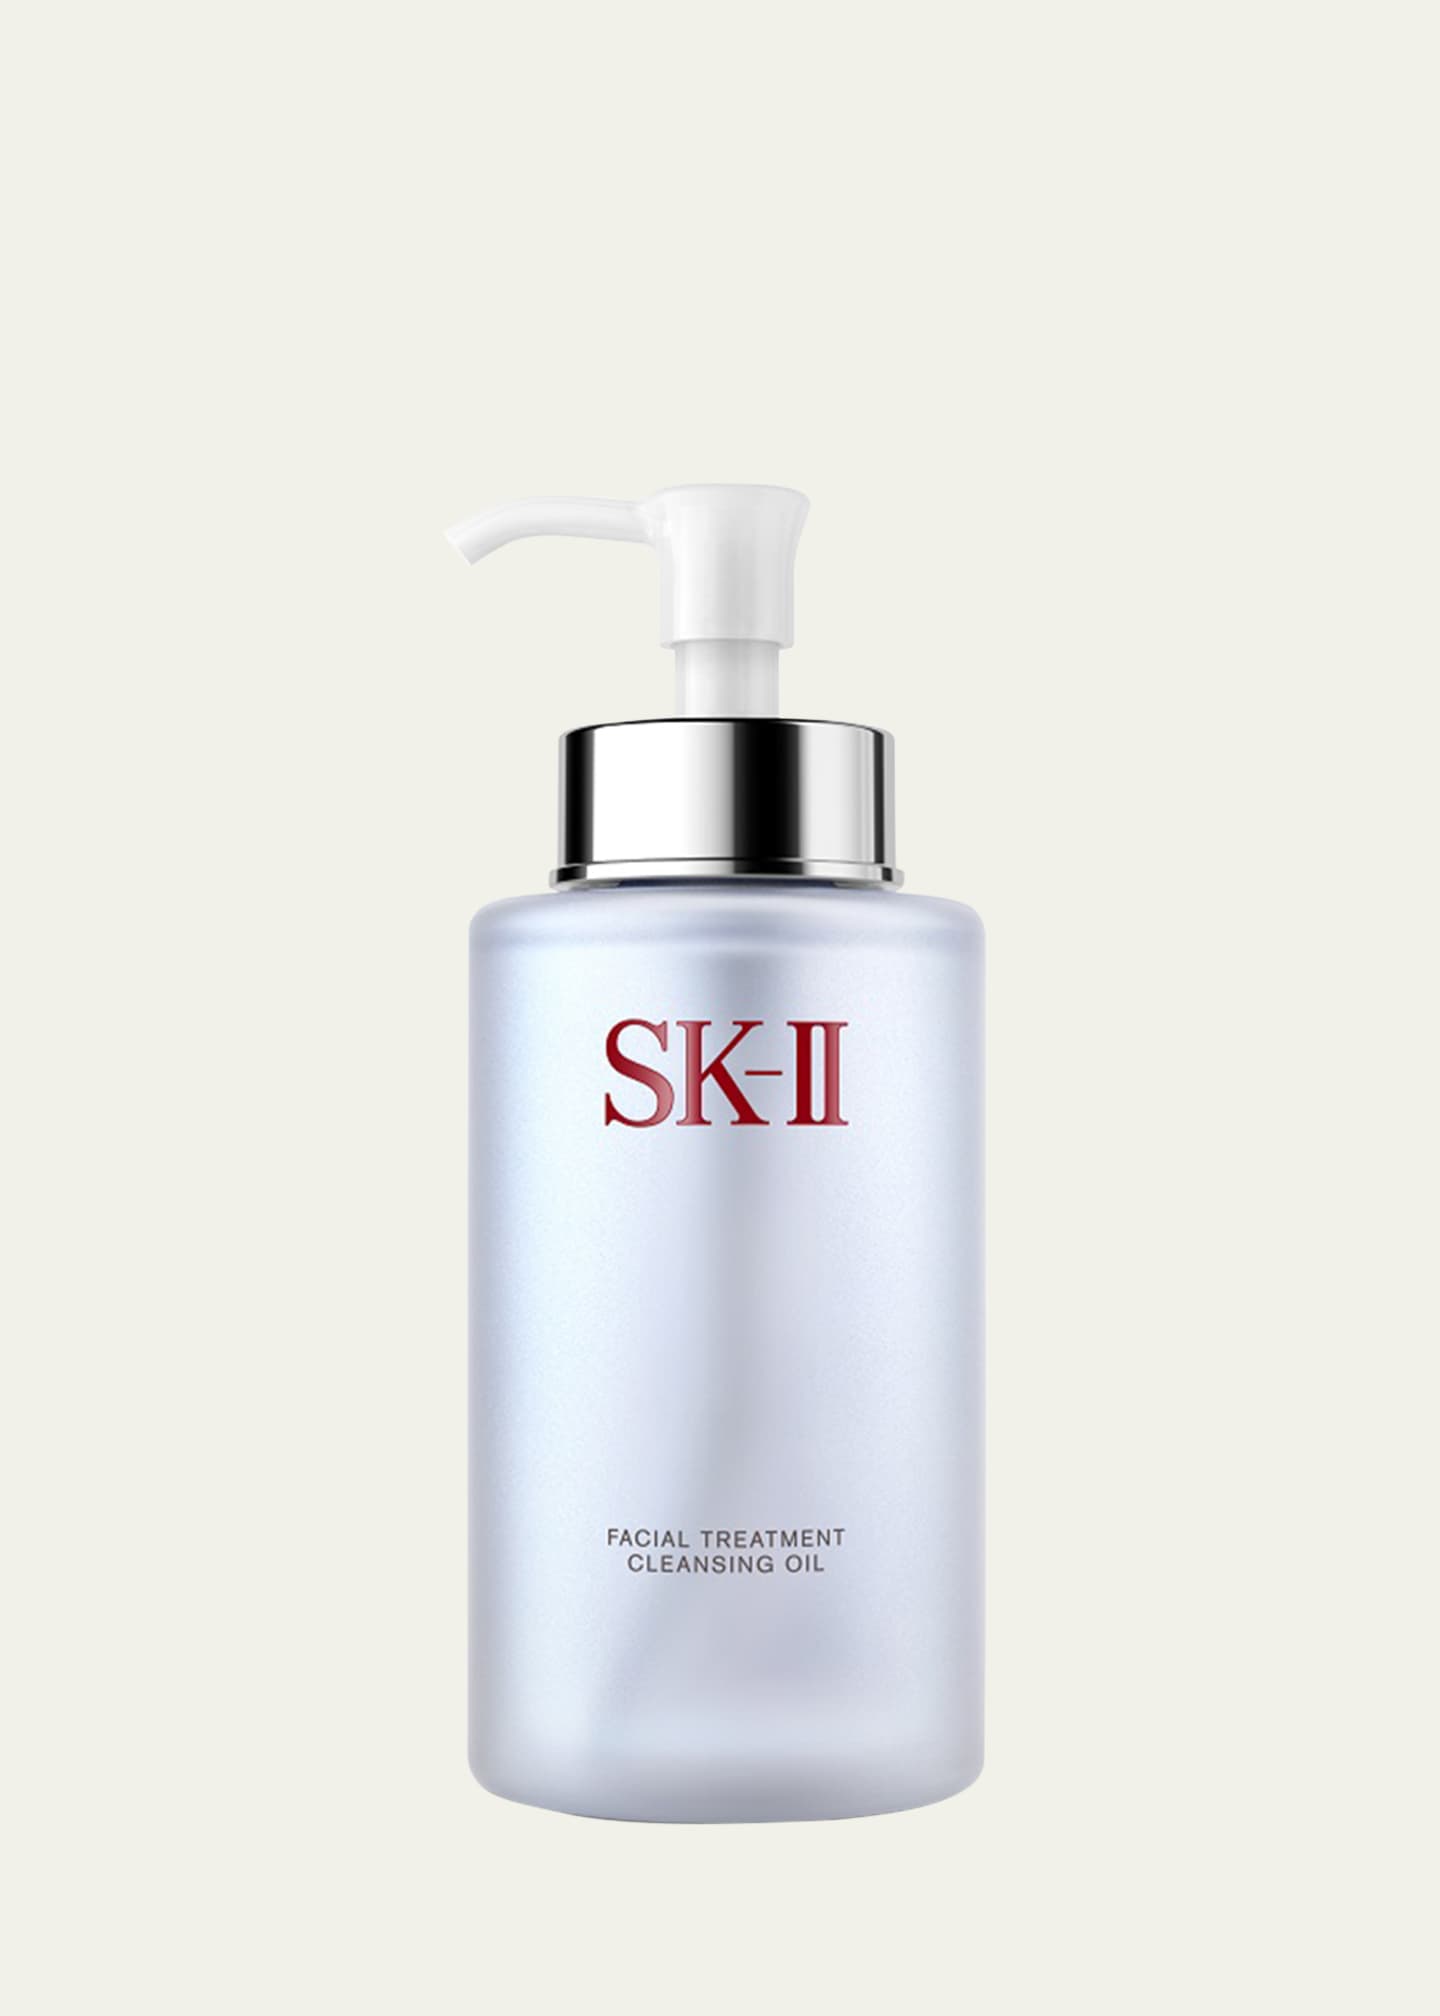 SK-II Facial Treatment Cleansing Oil, 8.4 oz. Image 1 of 3